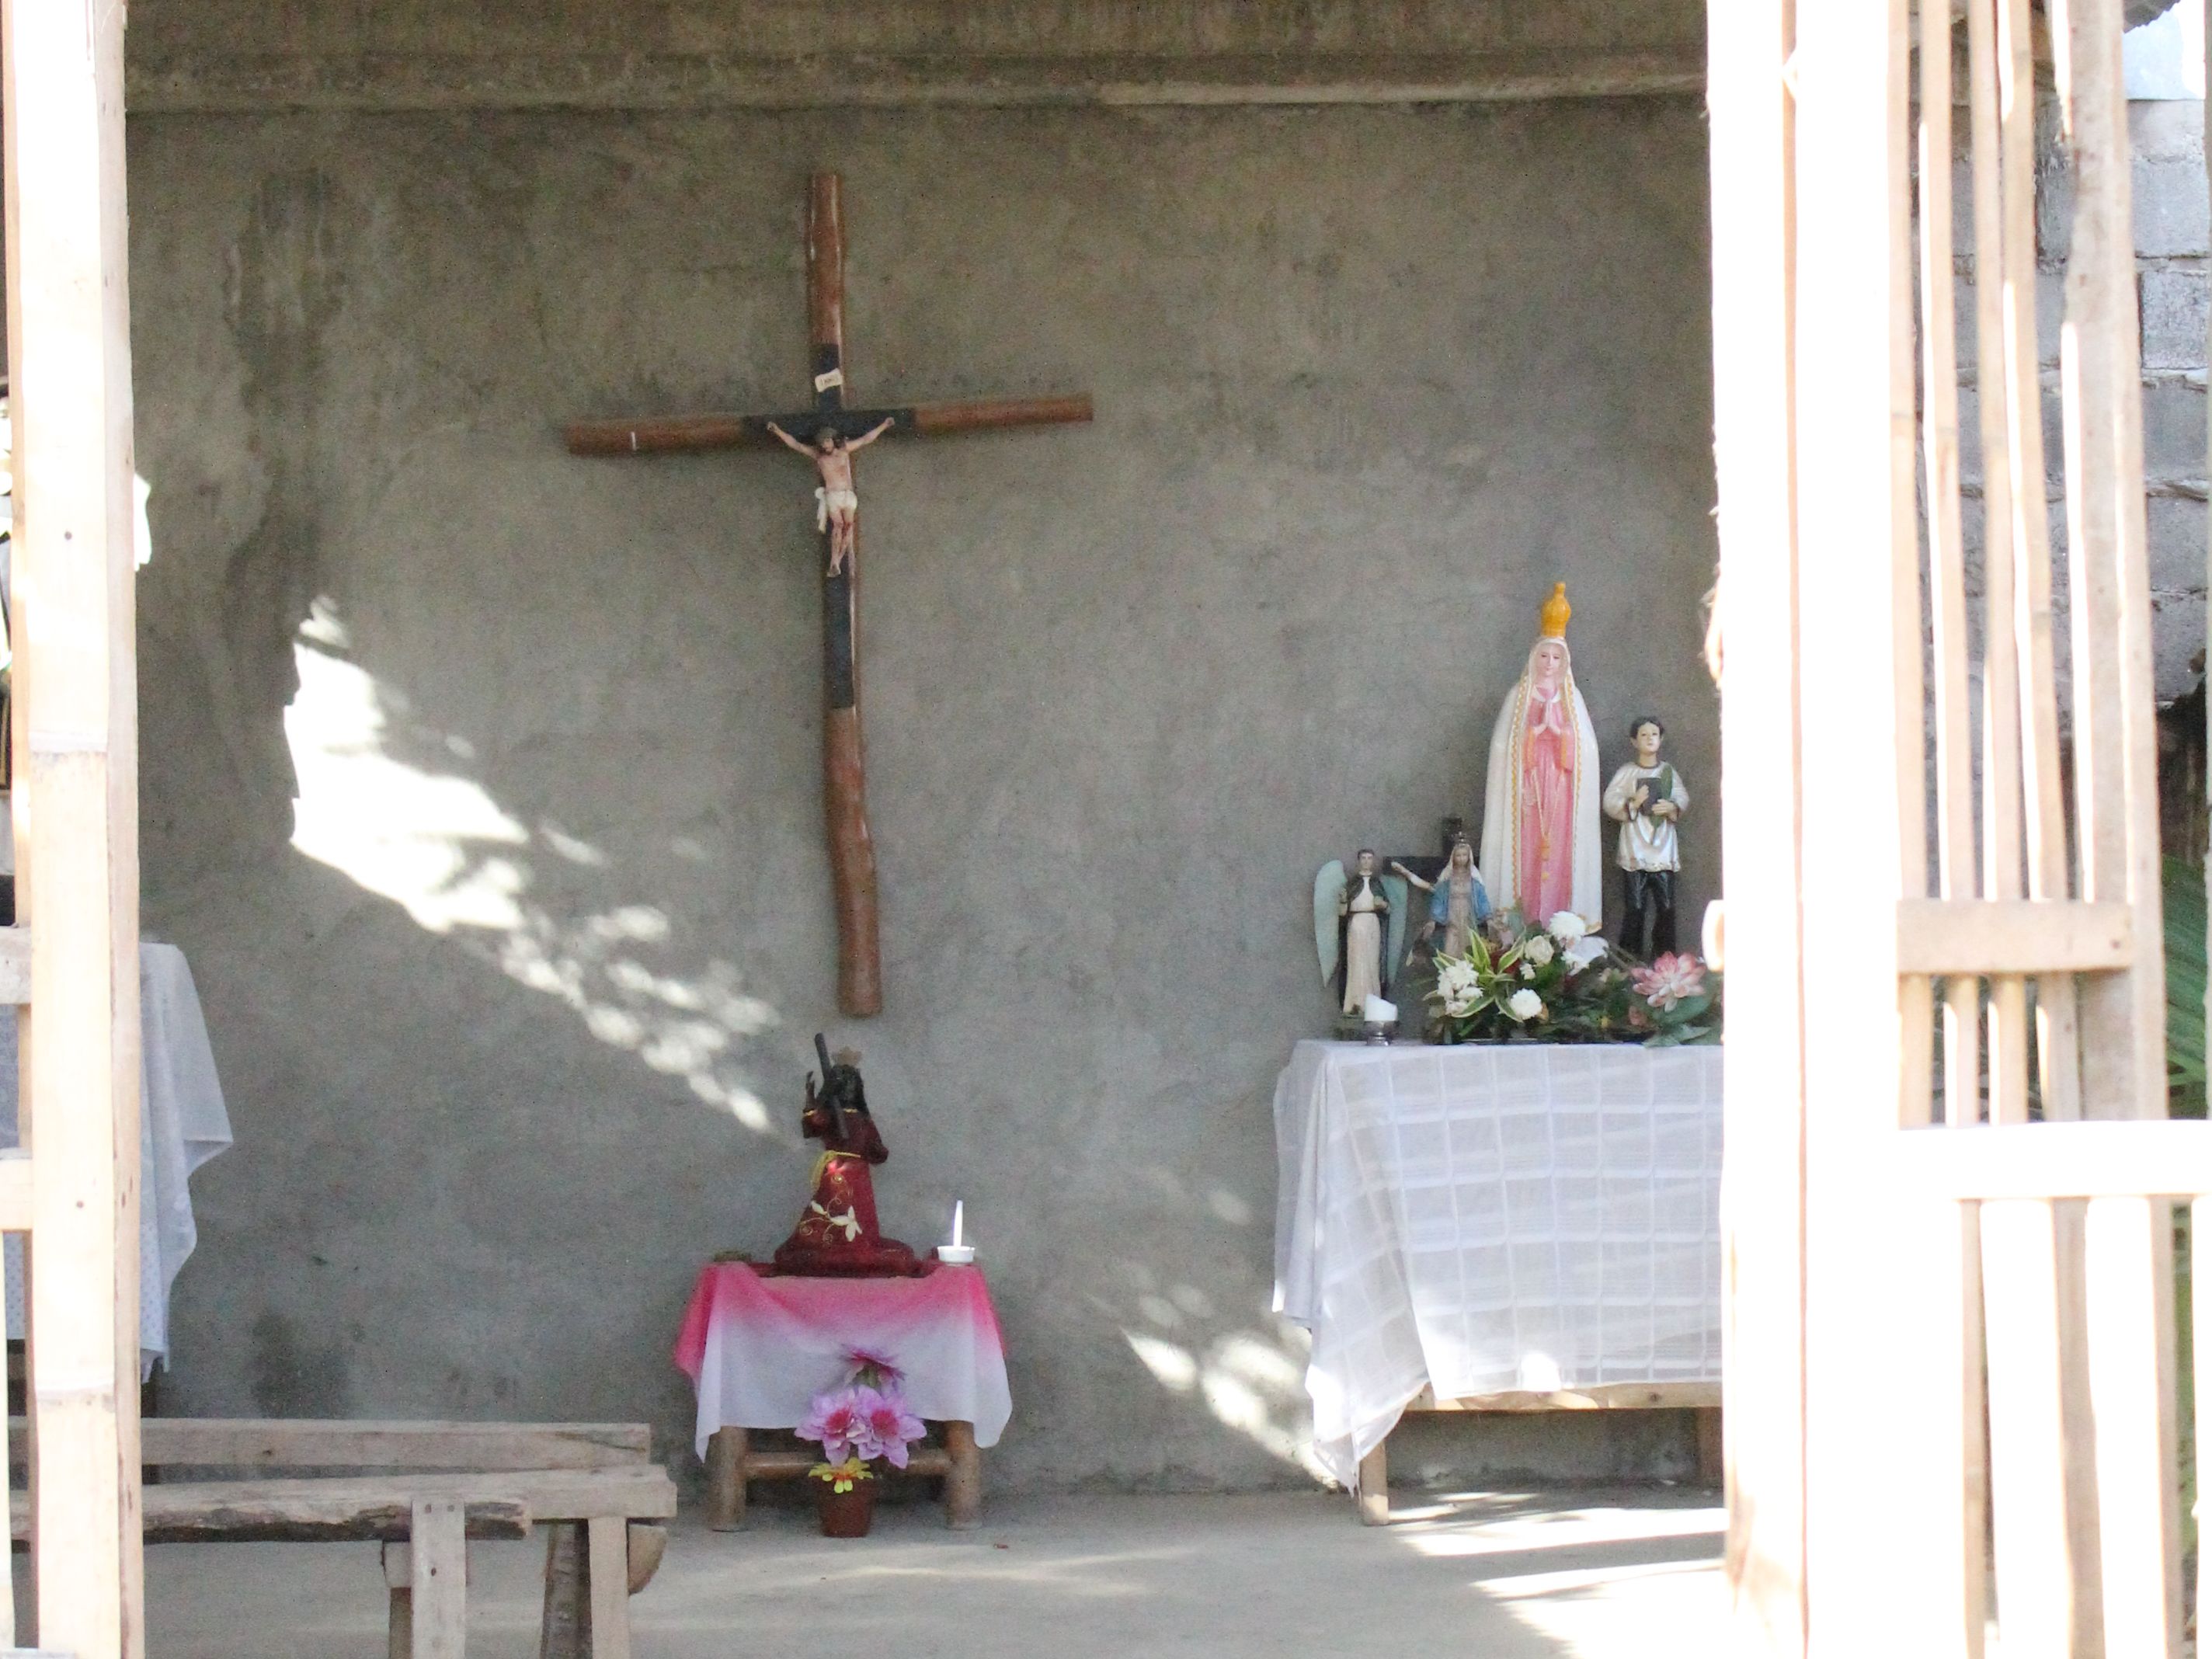 Church in the area hit by Typhoon Haiyan